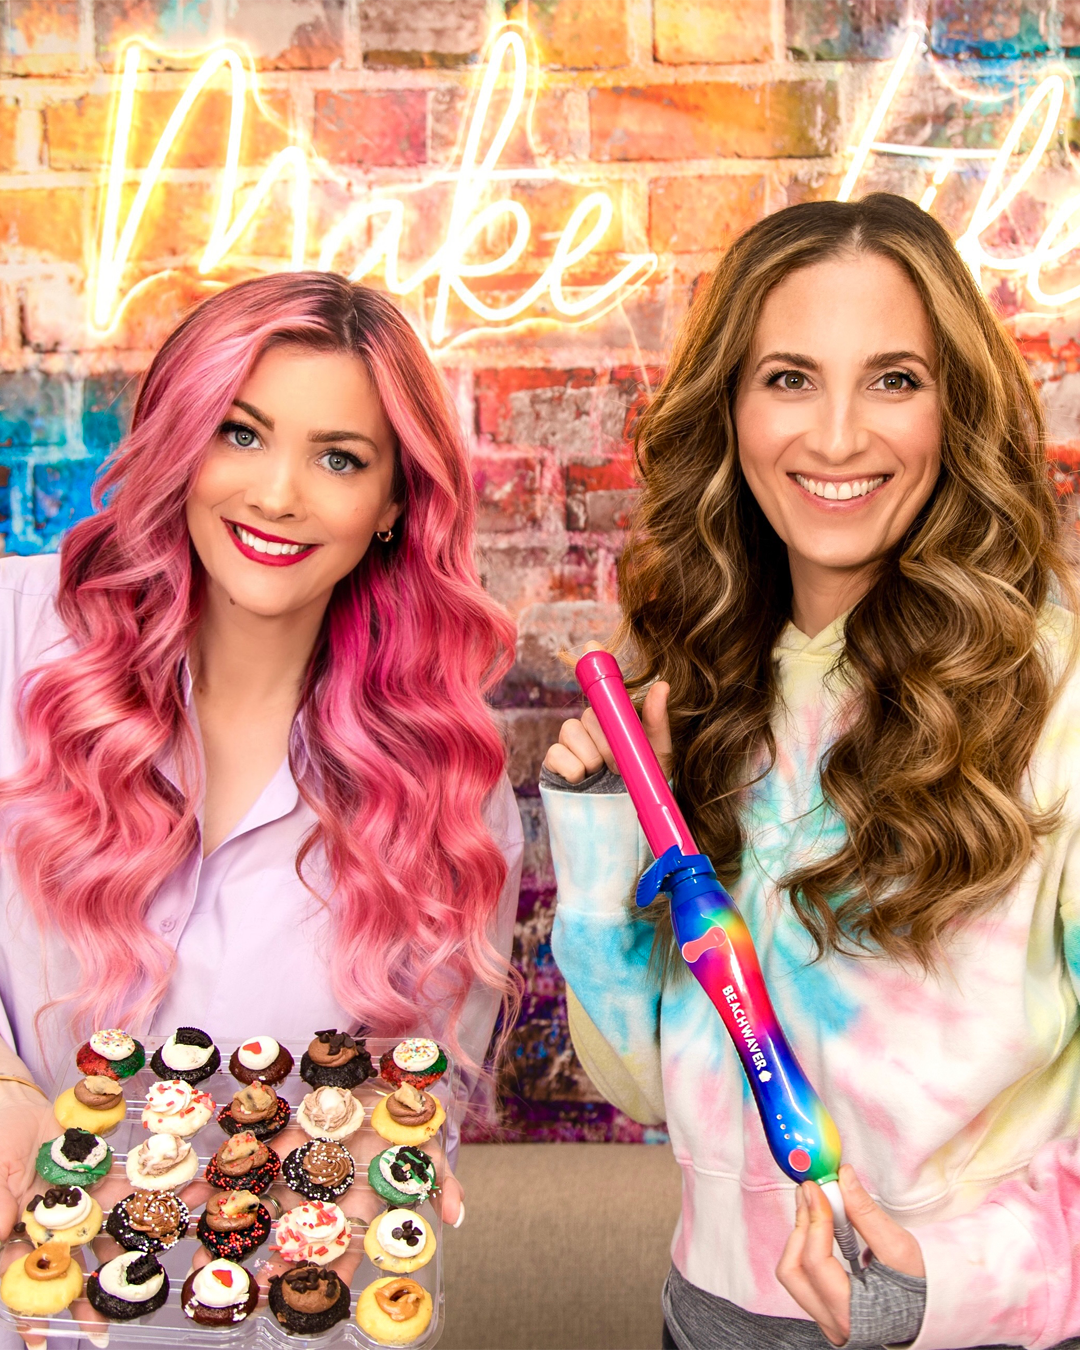 Image of Sarah Potempa and Baked by Melissa posing with a beach waver and cupcakes